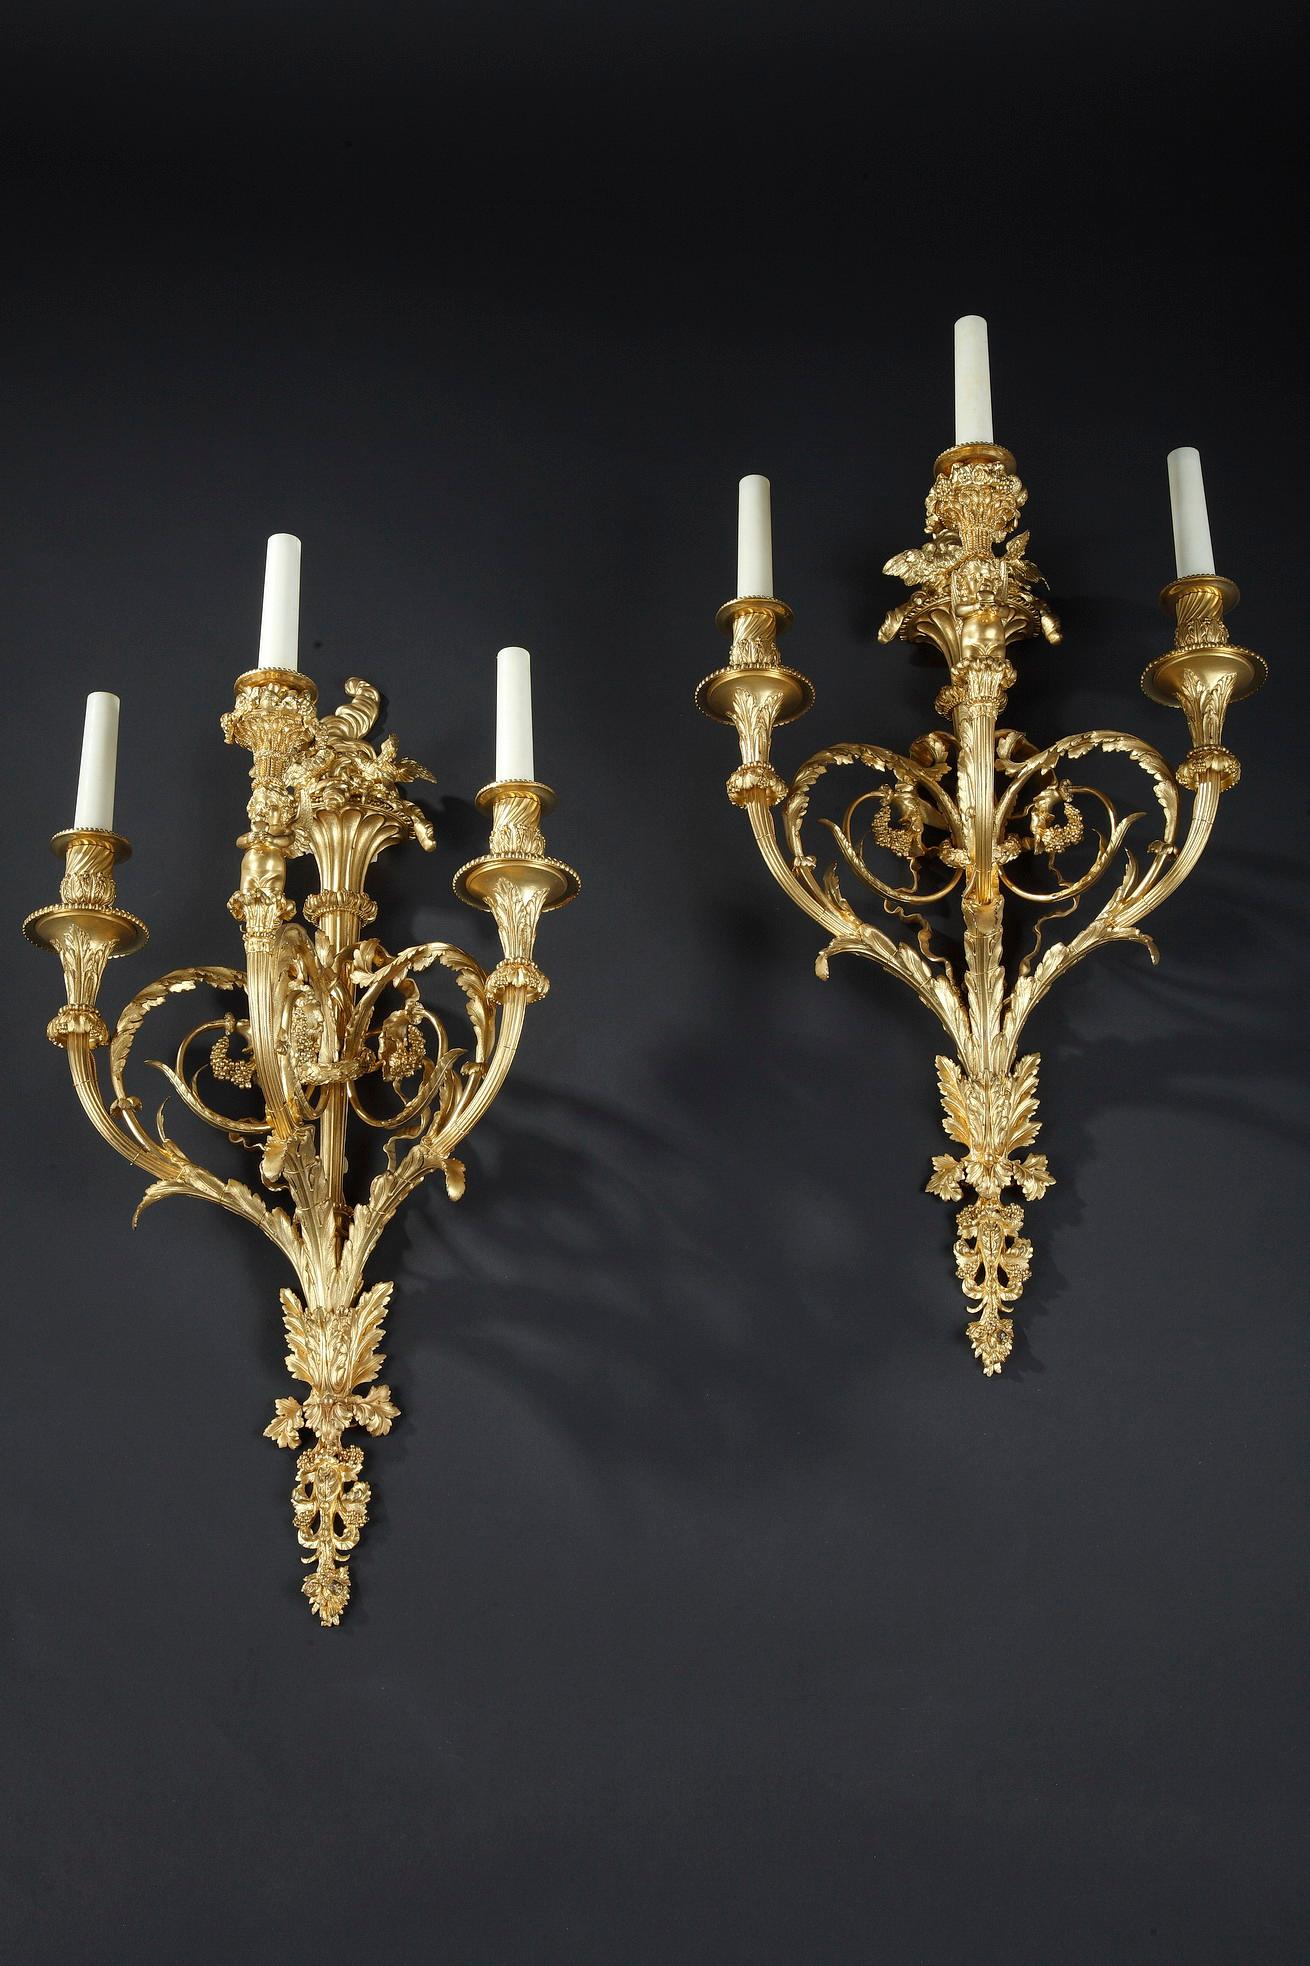 Elegant pair of Louis XVI style three-lights sconces in chiseled and gilded bronze signed Denière.
Composed of foliages, the branches mounted in arabesques are linked to the fluted barrel by a garland and a ribbon bow and ends by grapes. A little